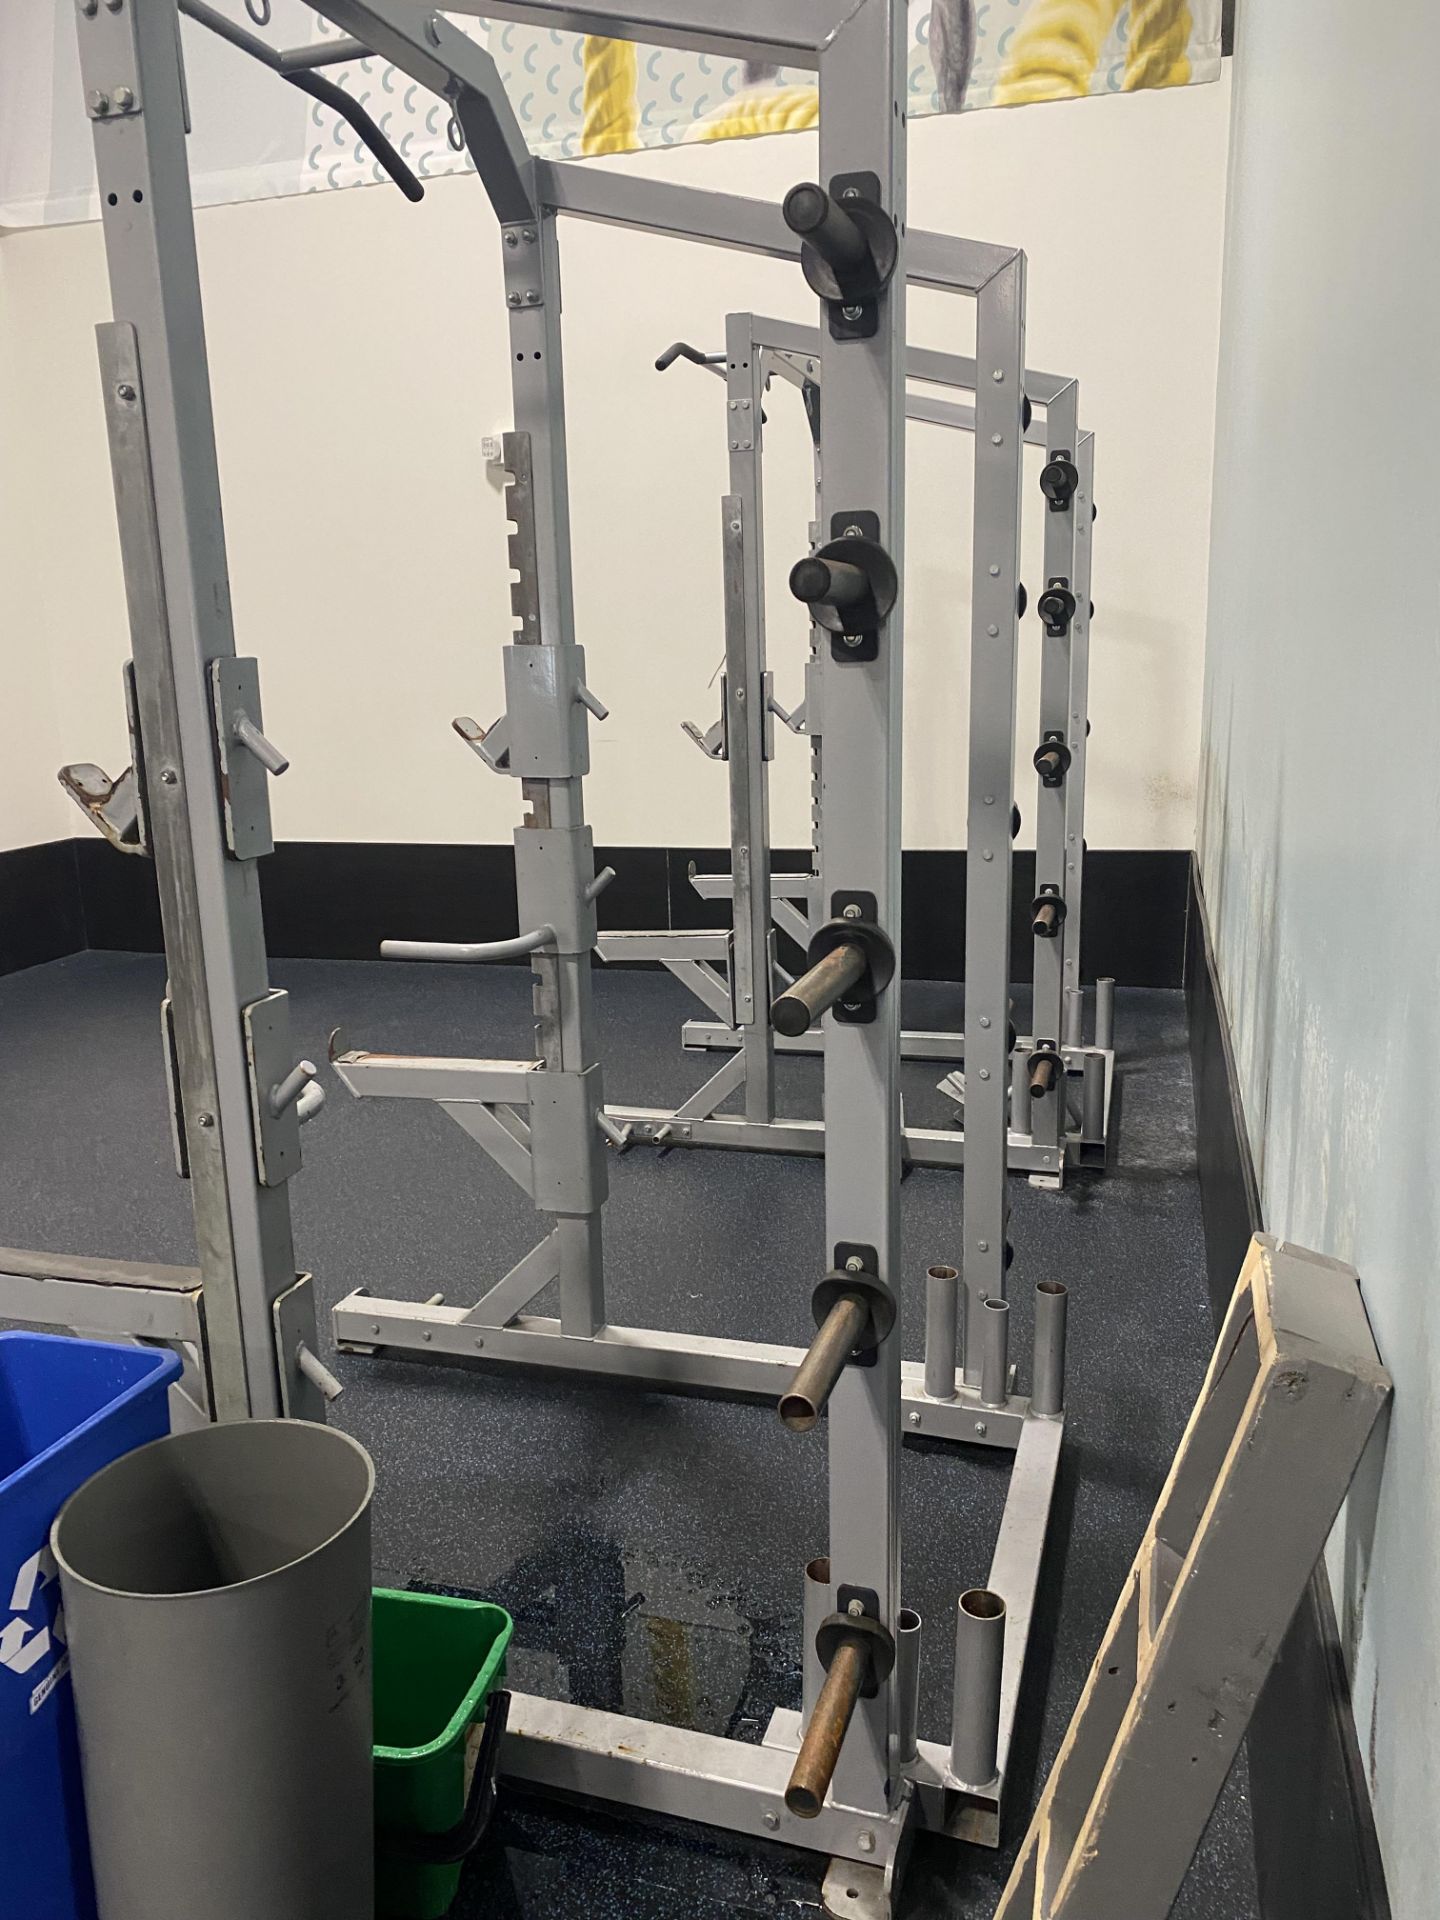 Squat Rack w/ Safety Bars, Weight Holder, and Pull up Bar (No Weights) - Image 3 of 4